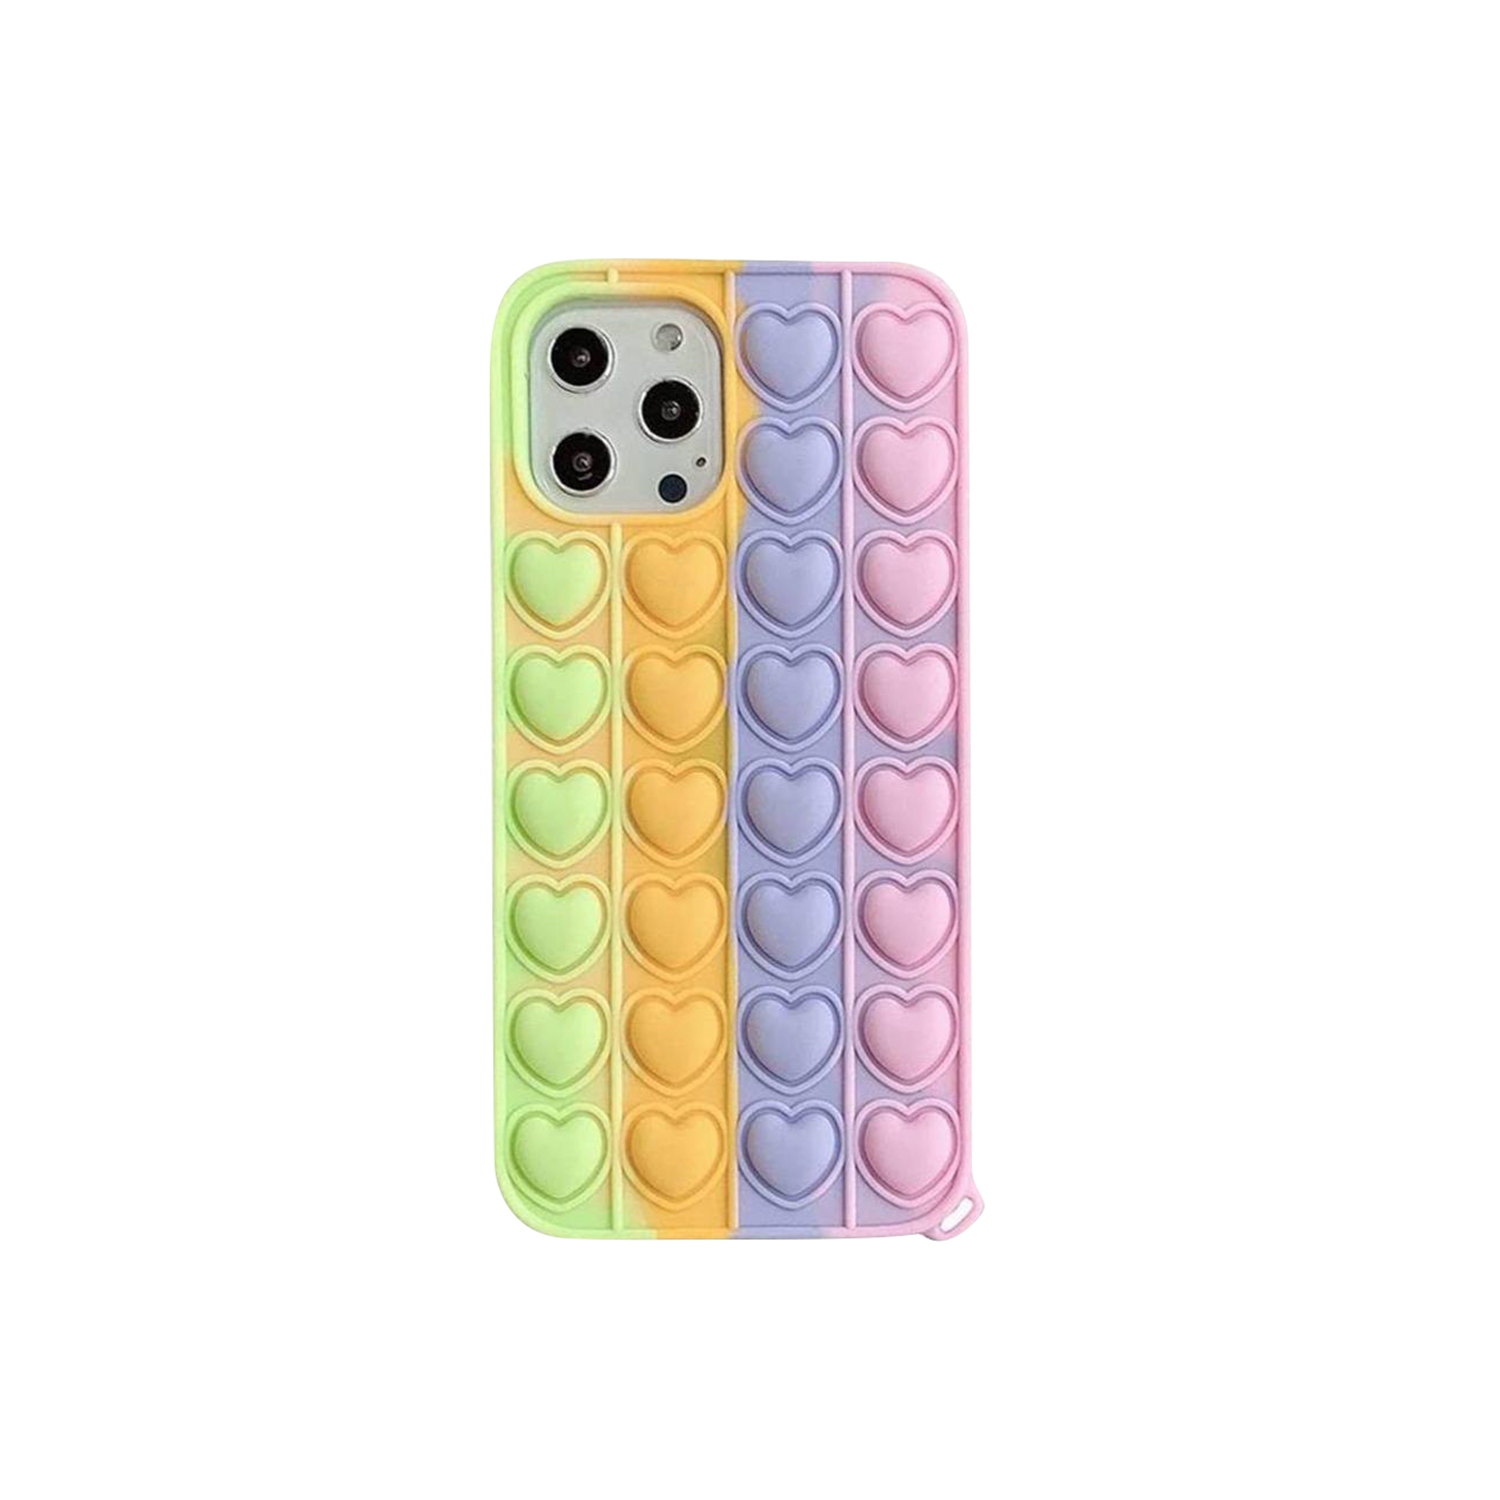 Sweat Heart Style Pop Fidget Toy Soft TPU Silicone Protective Case Cover For Apple iPhone 12 Pro Max - Rainbow